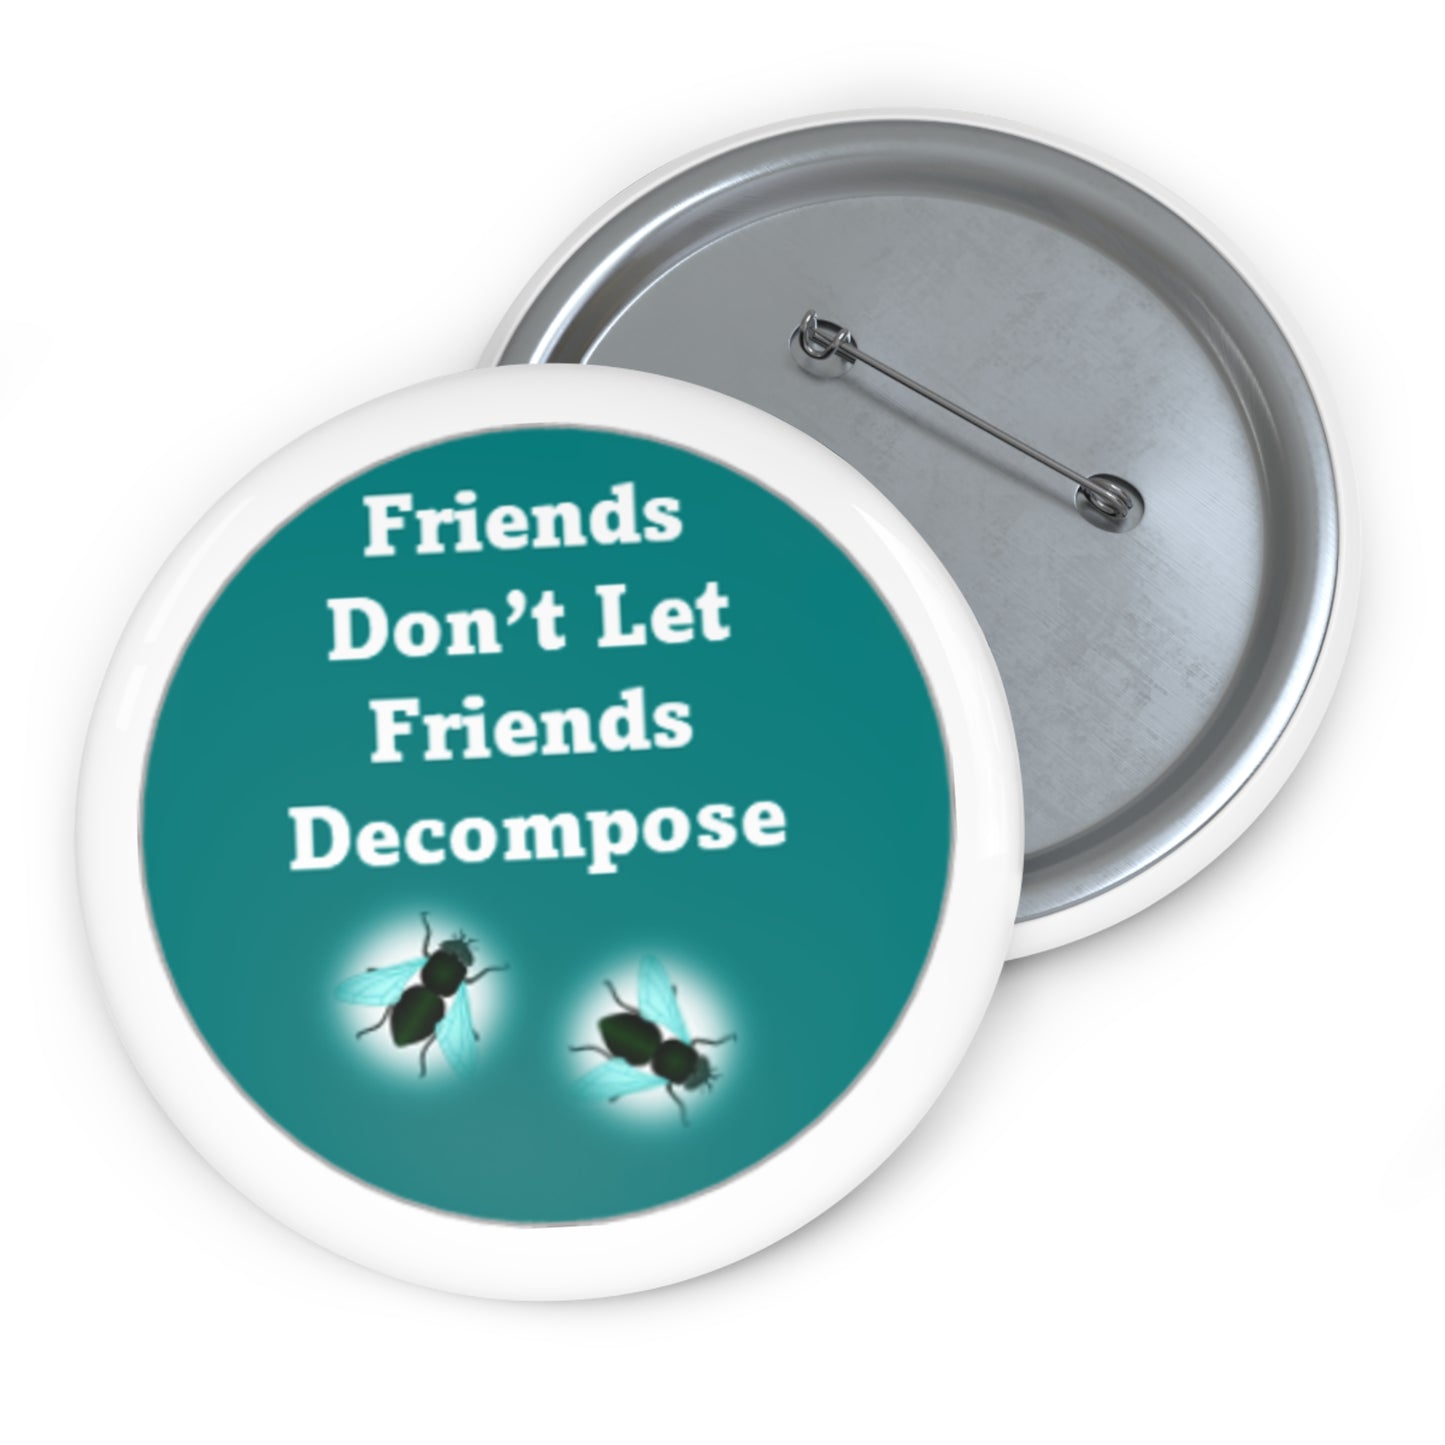 Friends Don't Let Friends Decompose - Teal - Custom Pin Buttons